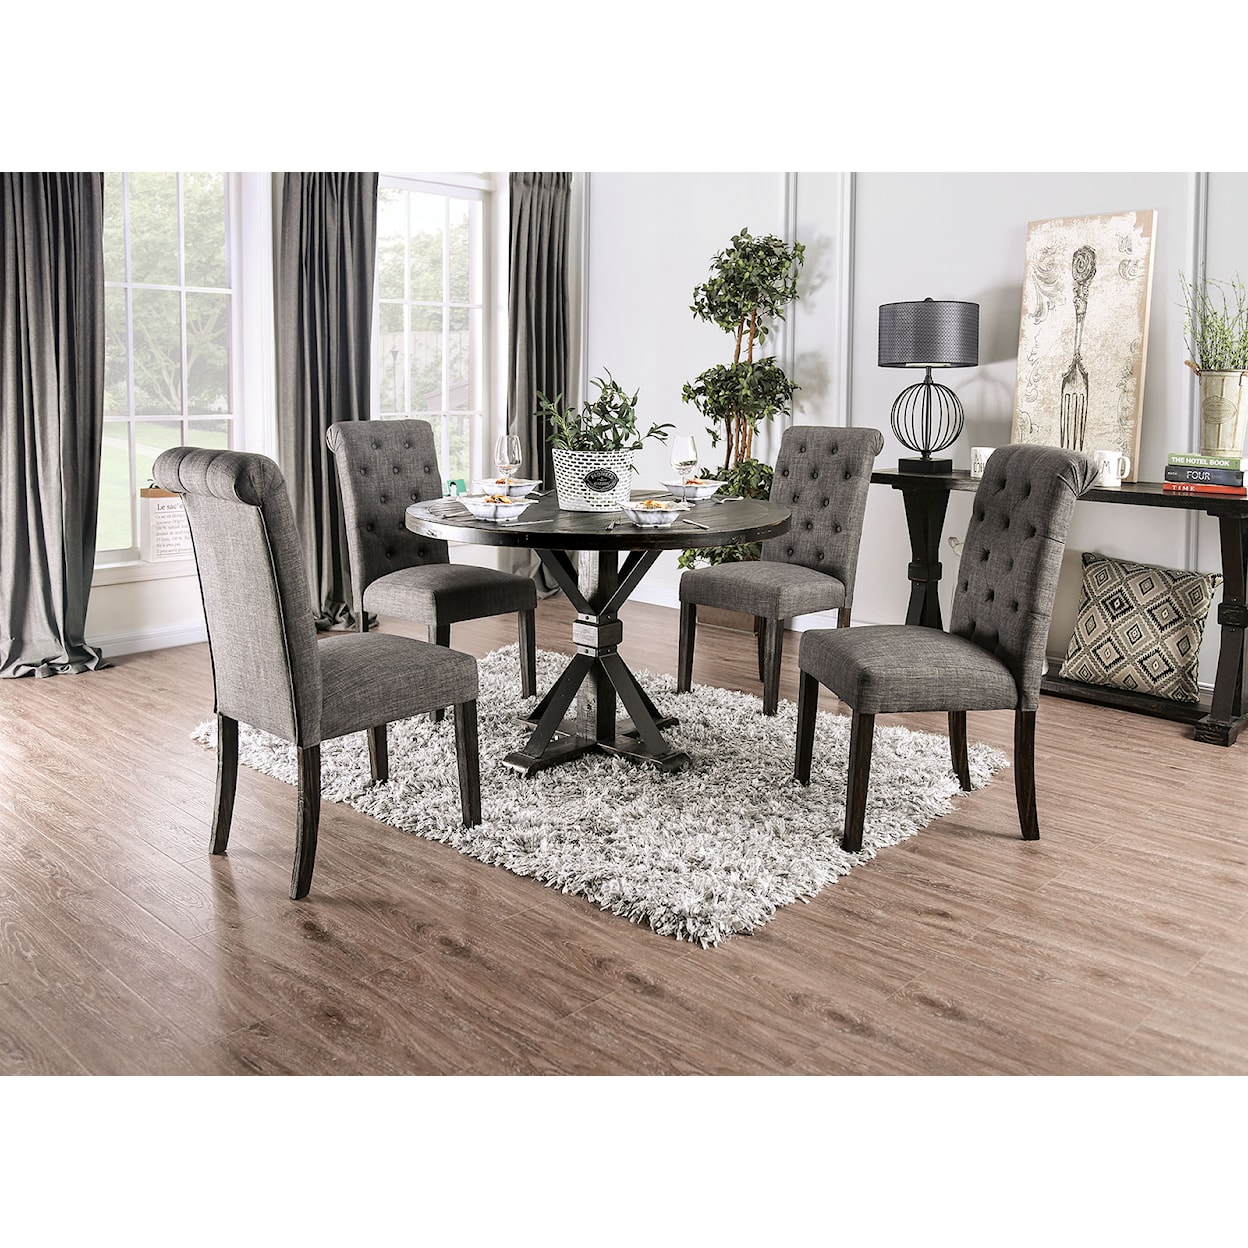 Furniture of America Alfred 5 Pc. Round Dining Table Set